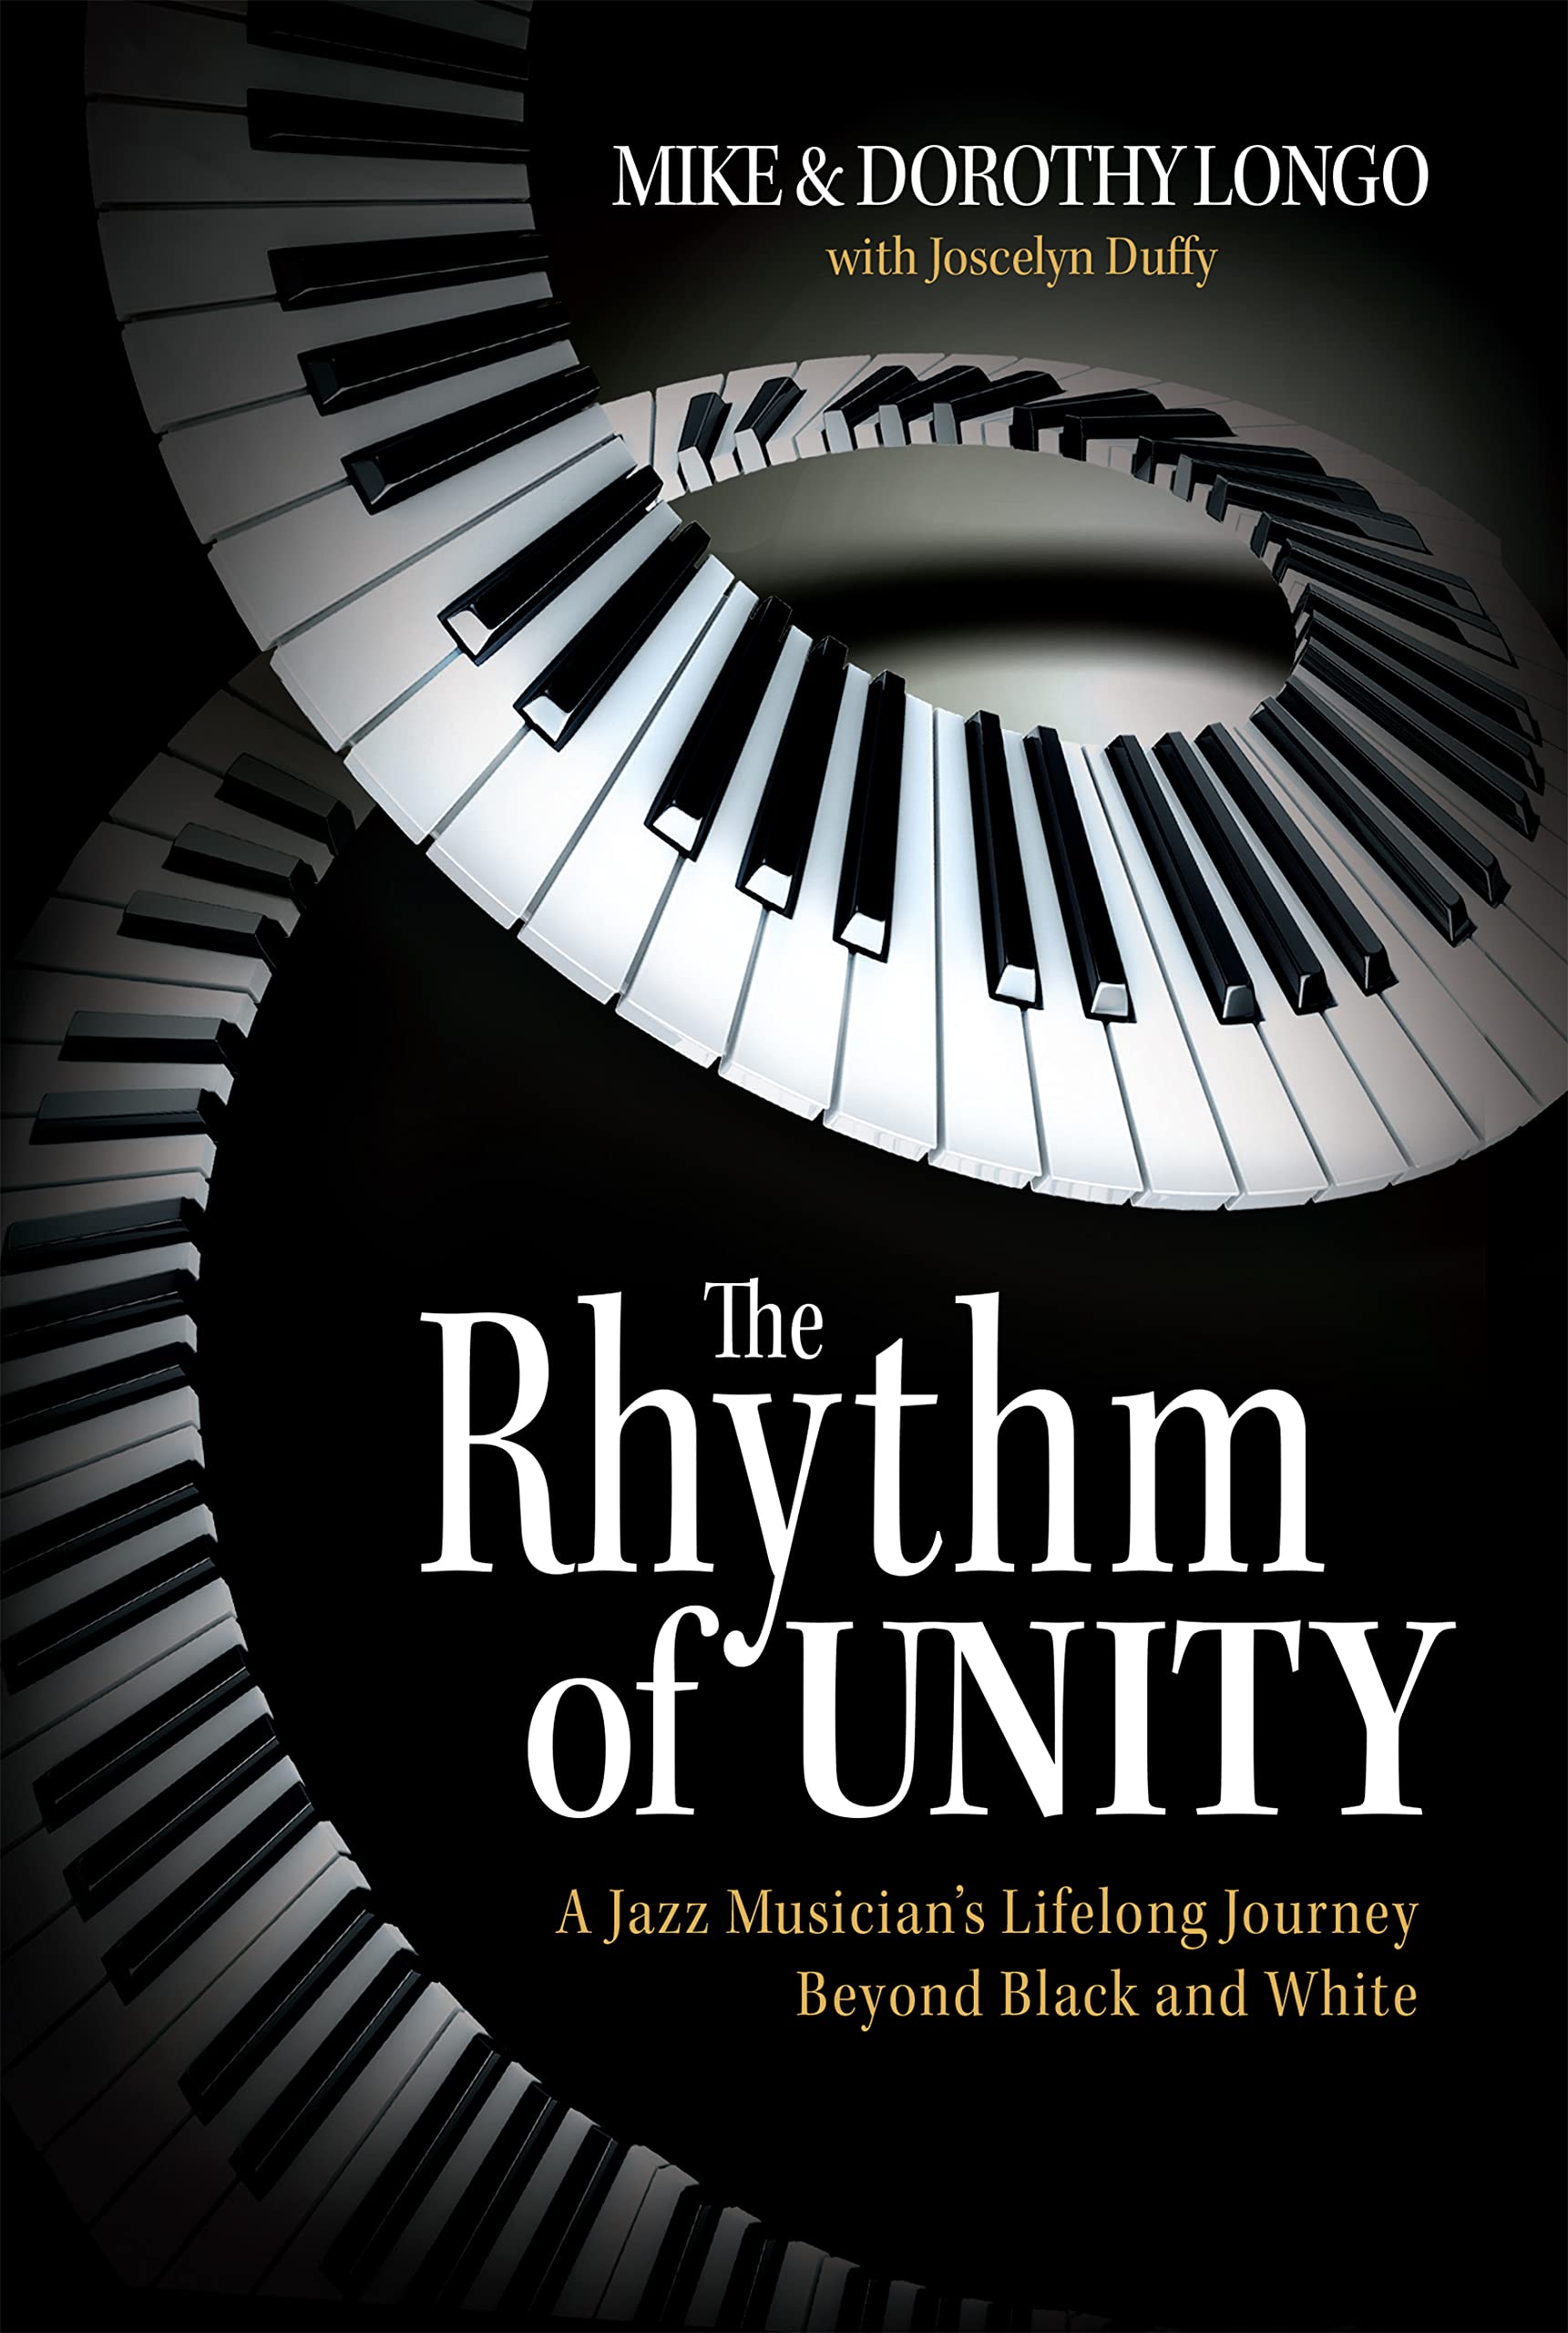 The Rhythm of Unity: A Jazz Musician’s Lifelong Journey Beyond Black and White